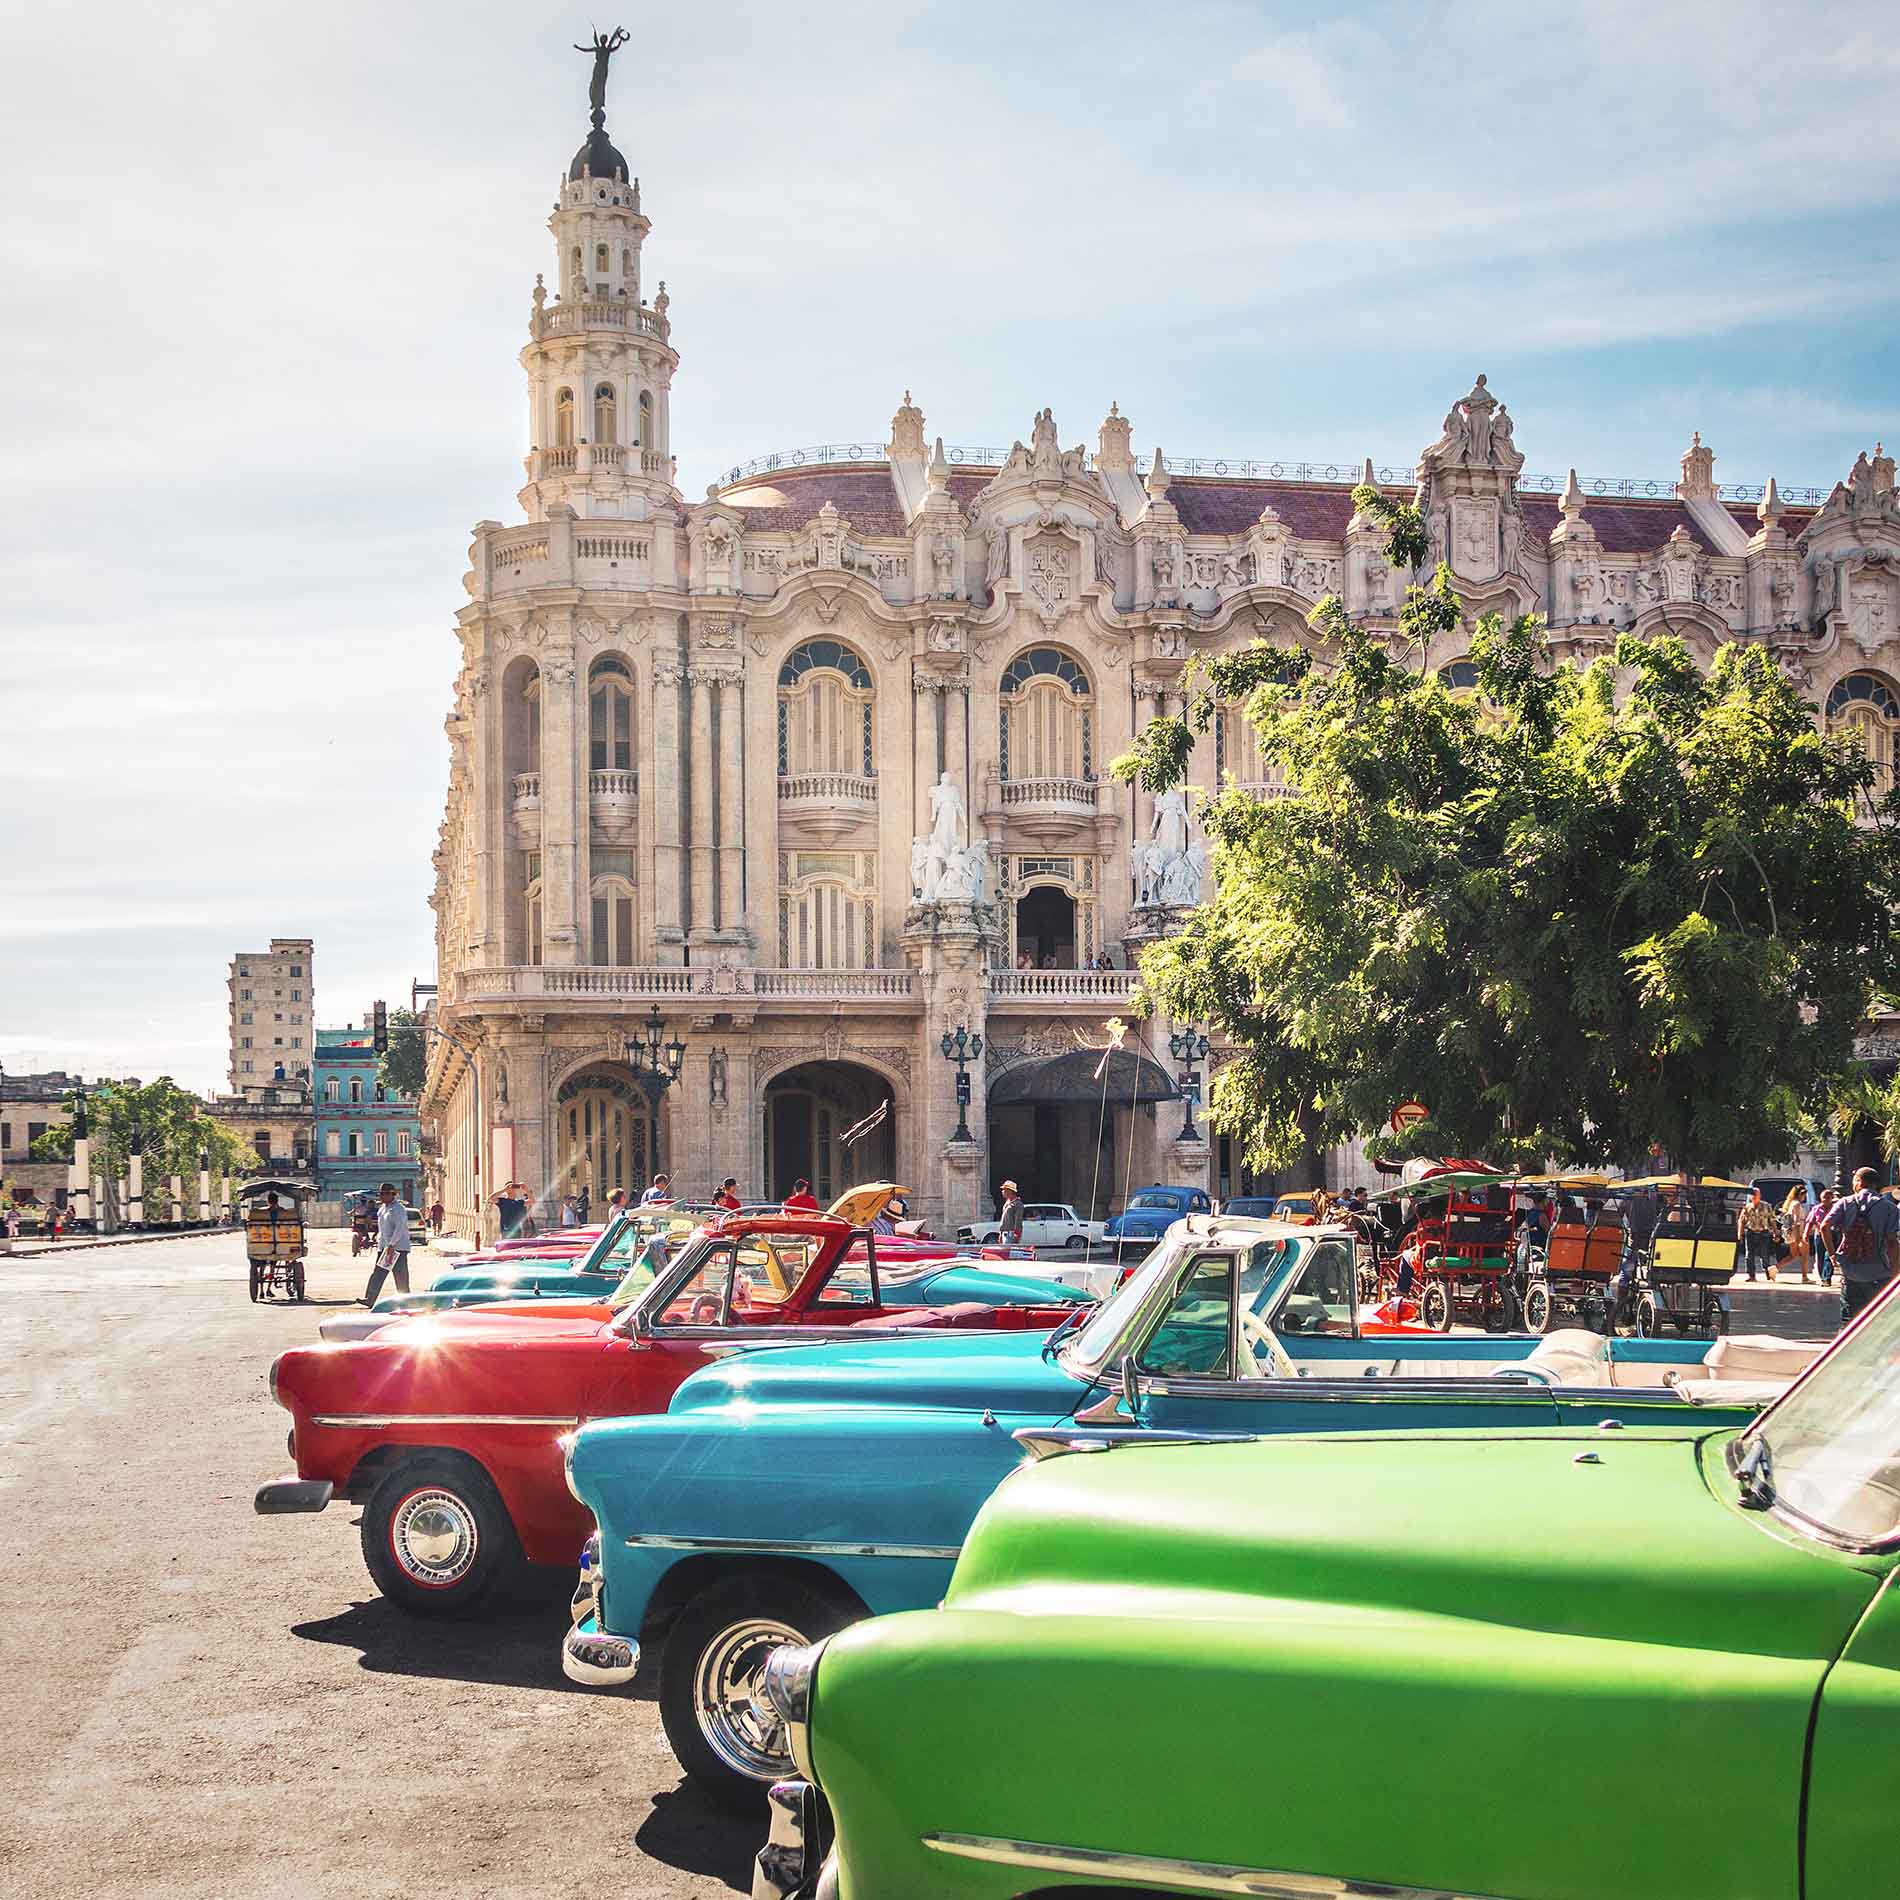 A row of colorful vintage convertible cars parked on one side of a road in front of an elaborately decorated multi-story building on a sunny day.